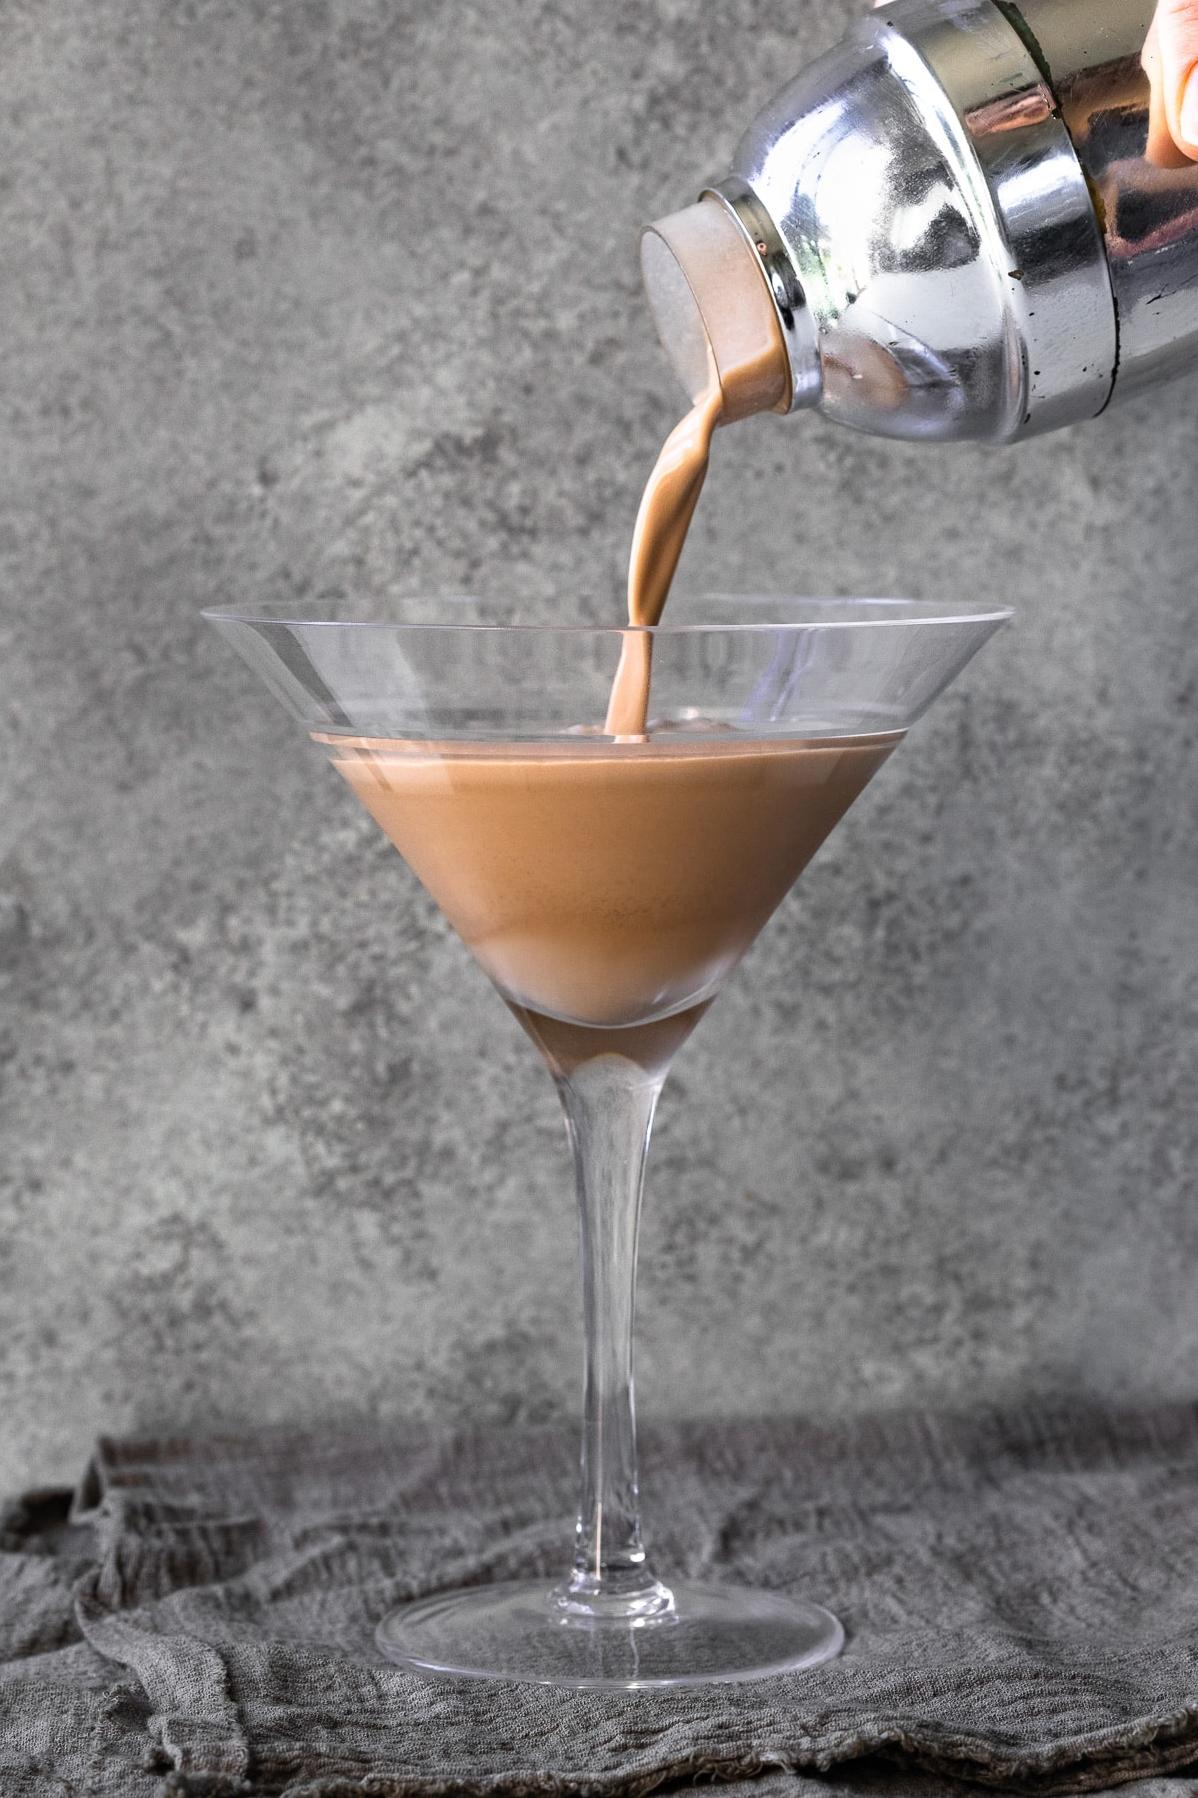  A wonderful homemade gift for friends who love Baileys